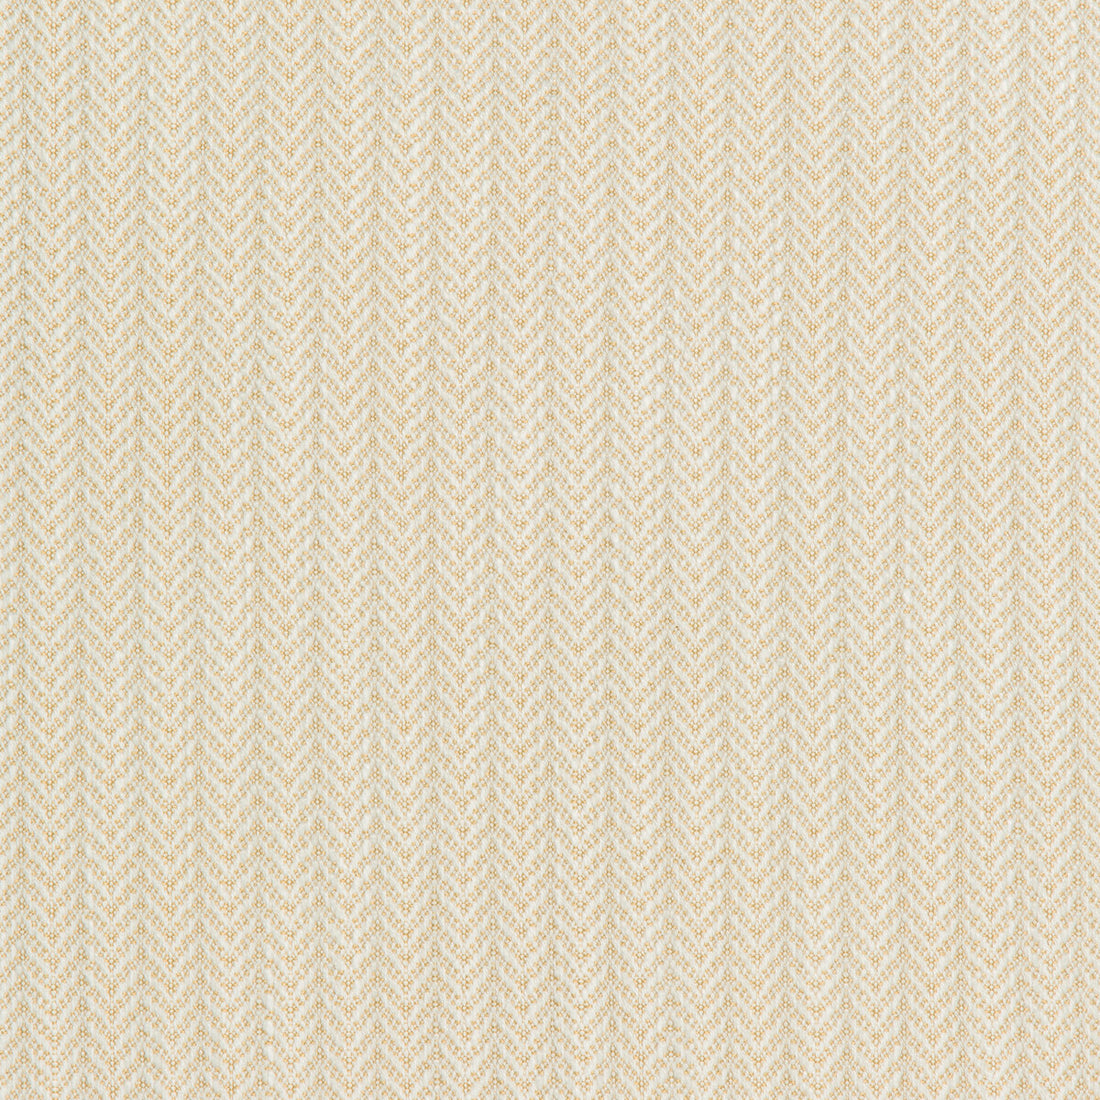 Kravet Design fabric in 36087-1614 color - pattern 36087.1614.0 - by Kravet Design in the Inside Out Performance Fabrics collection